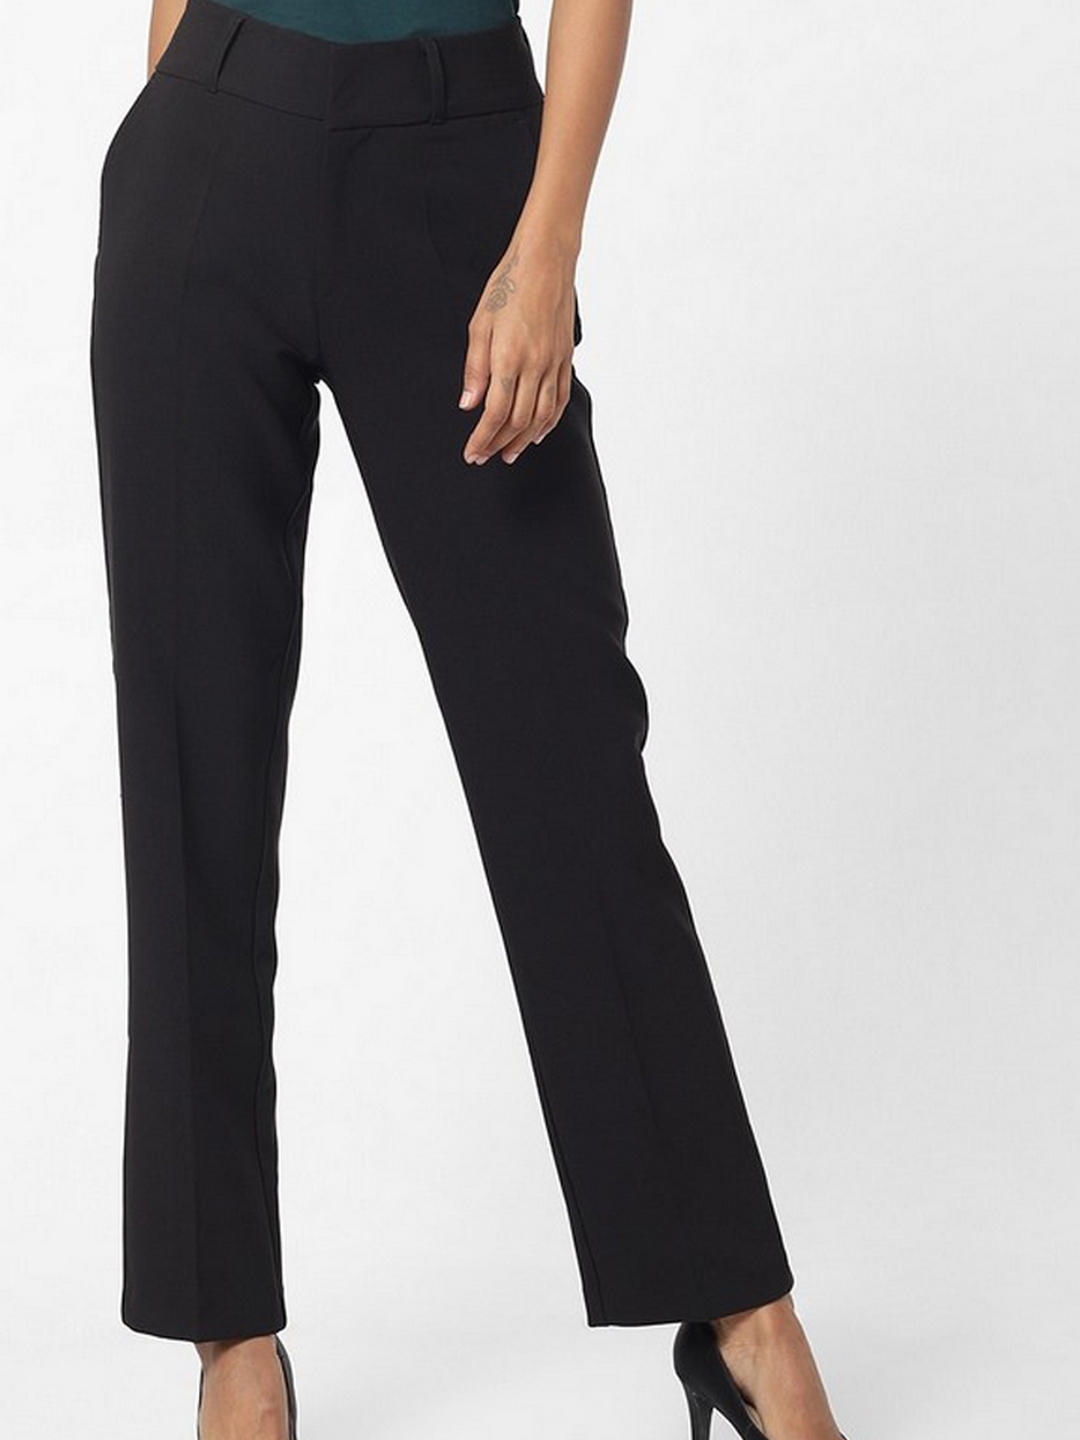 PETER ENGLAND Tapered Women Black Trousers - Buy PETER ENGLAND Tapered Women  Black Trousers Online at Best Prices in India | Flipkart.com